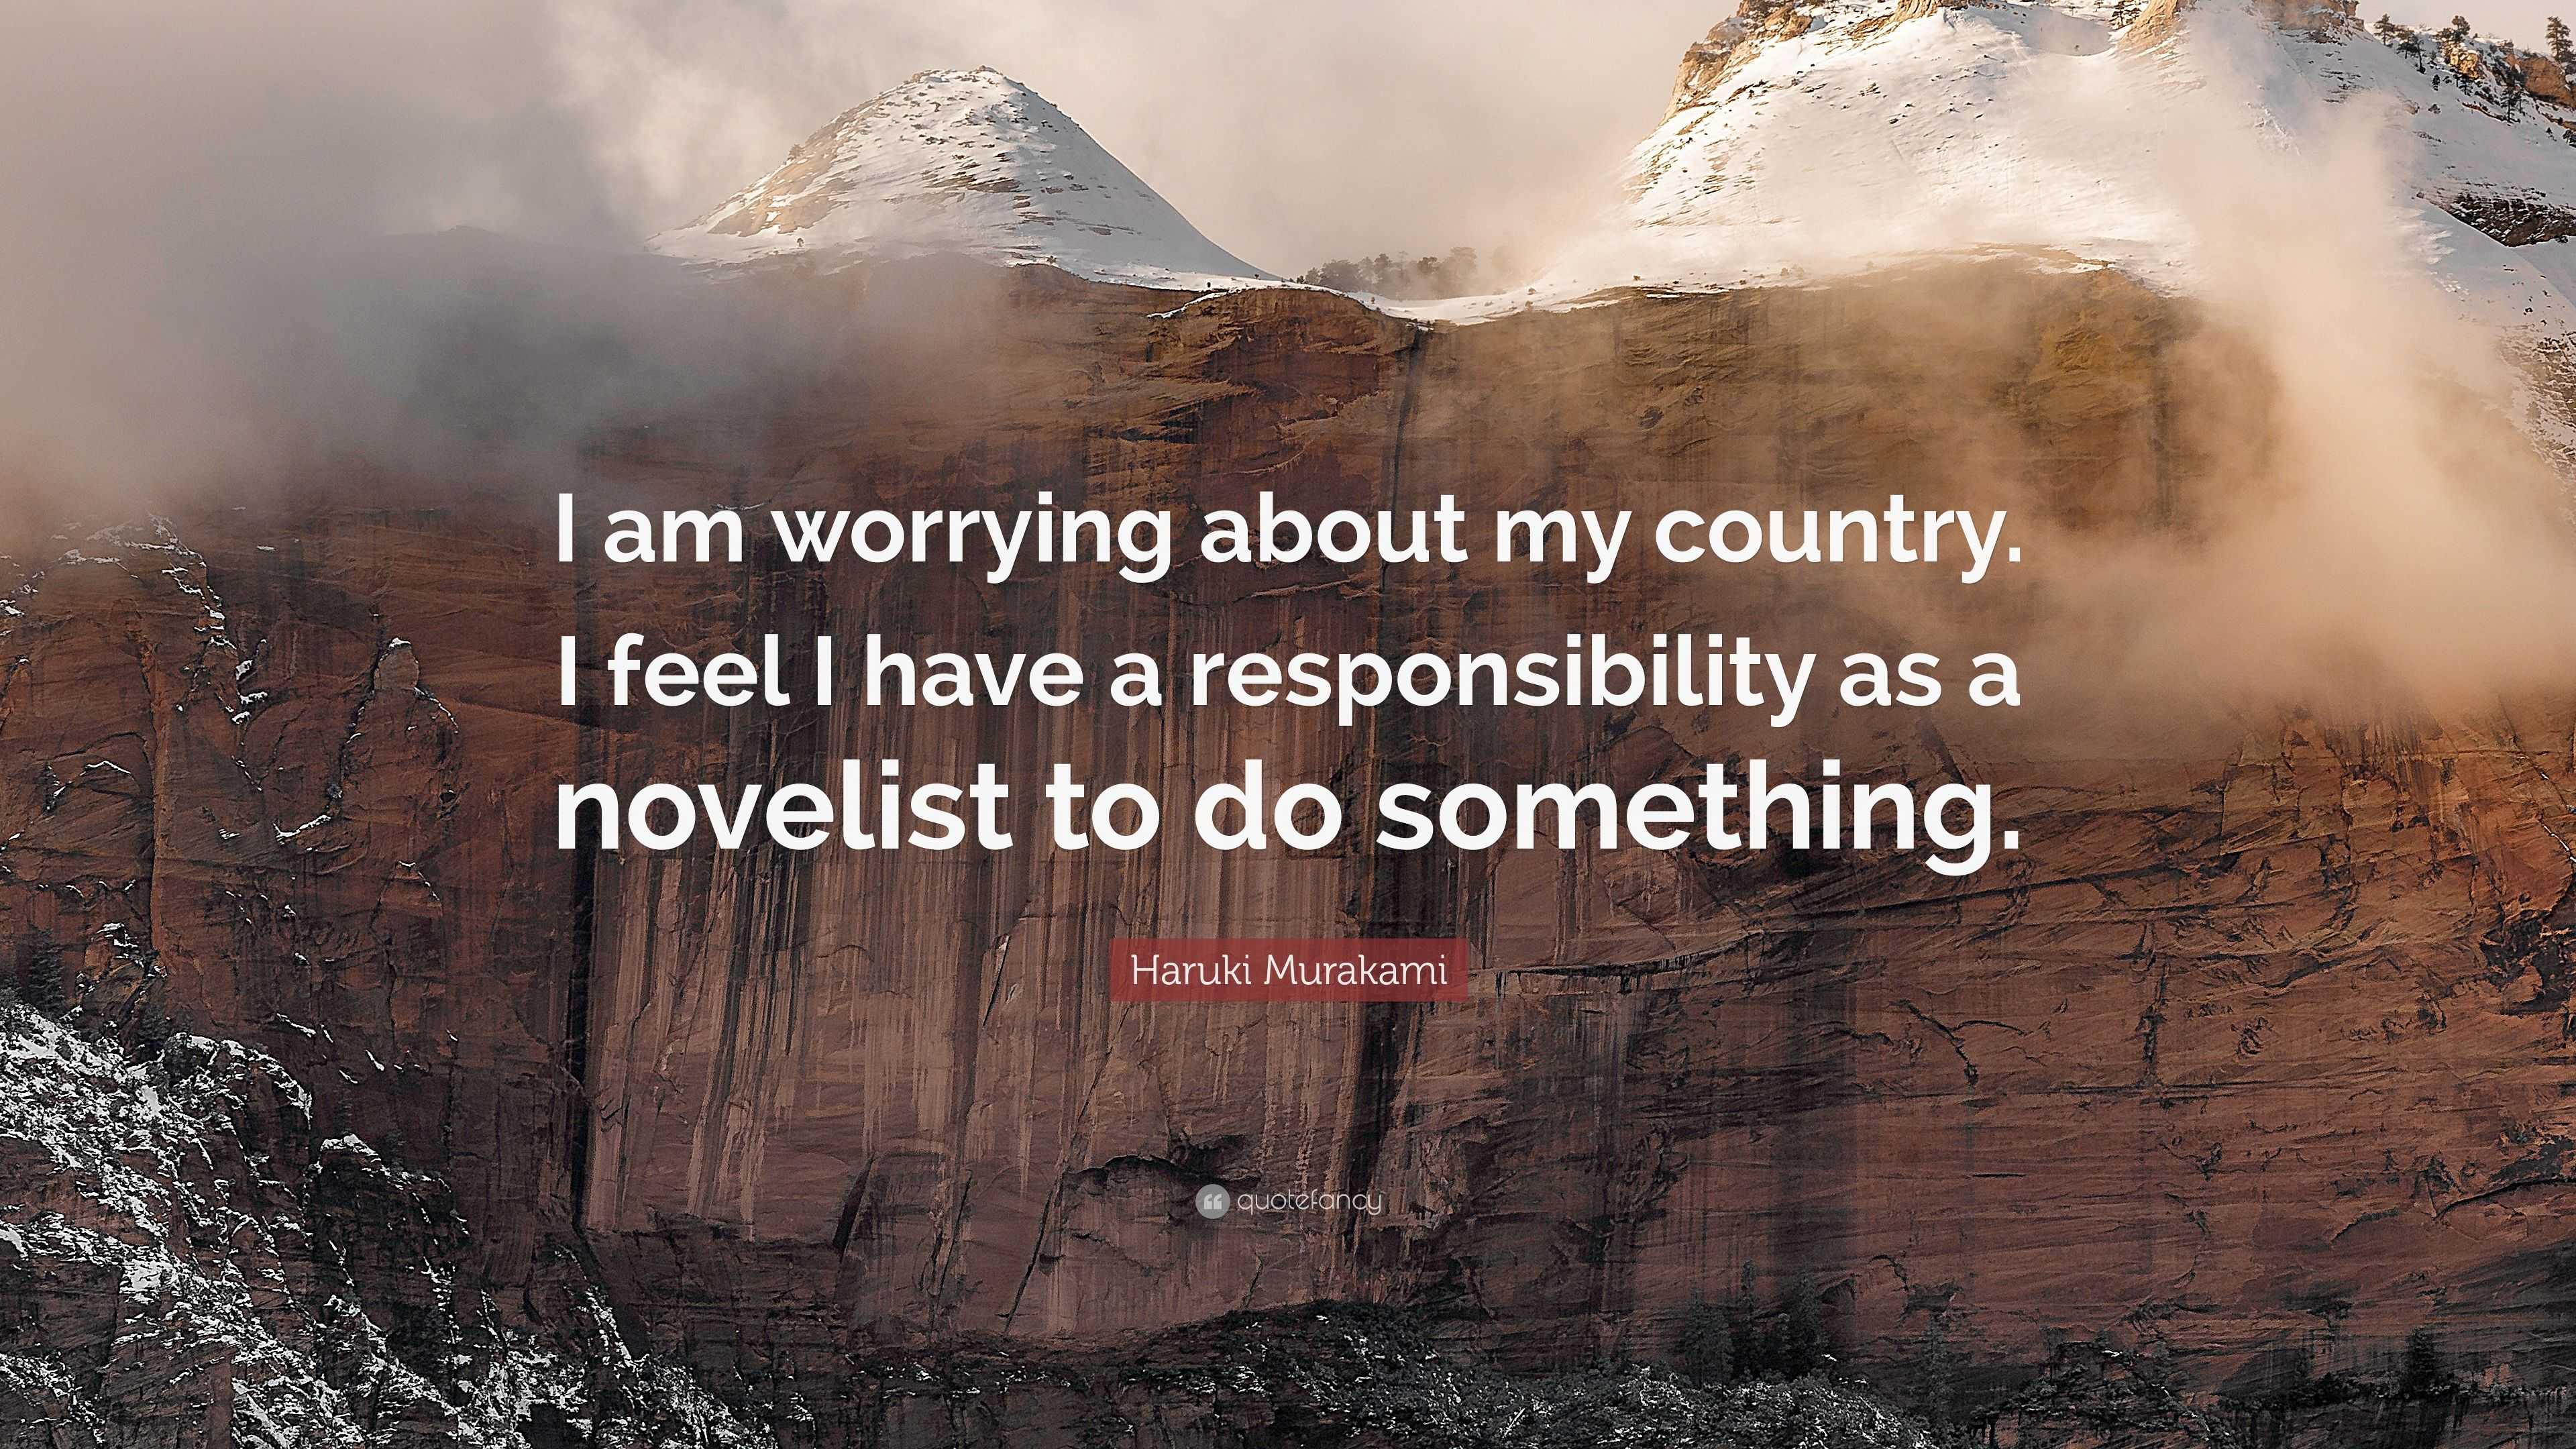 Haruki Murakami Quote: “I am worrying about my country. I feel I have a ...